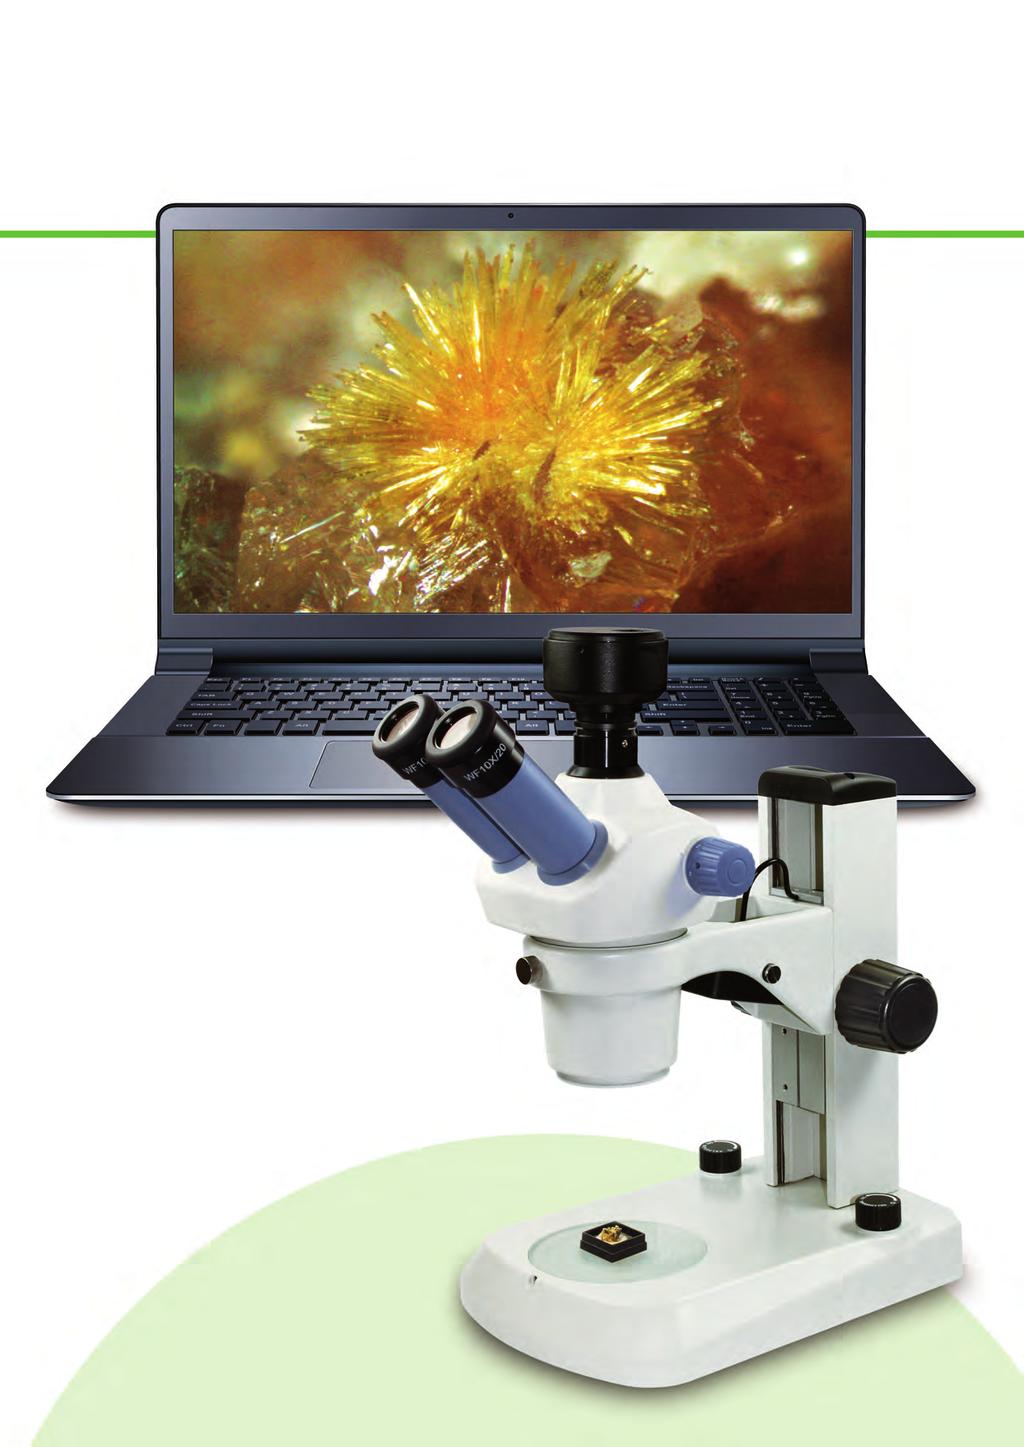 Microscope Digital Cameras Visiocam AS - IS - IShd Series Digital videocameras, easy-to-use and suitable to any kind of observation. Resolutions: 1.3-3.0-5.0-10.0 MPixels. Sensors: C MOS - CCD.